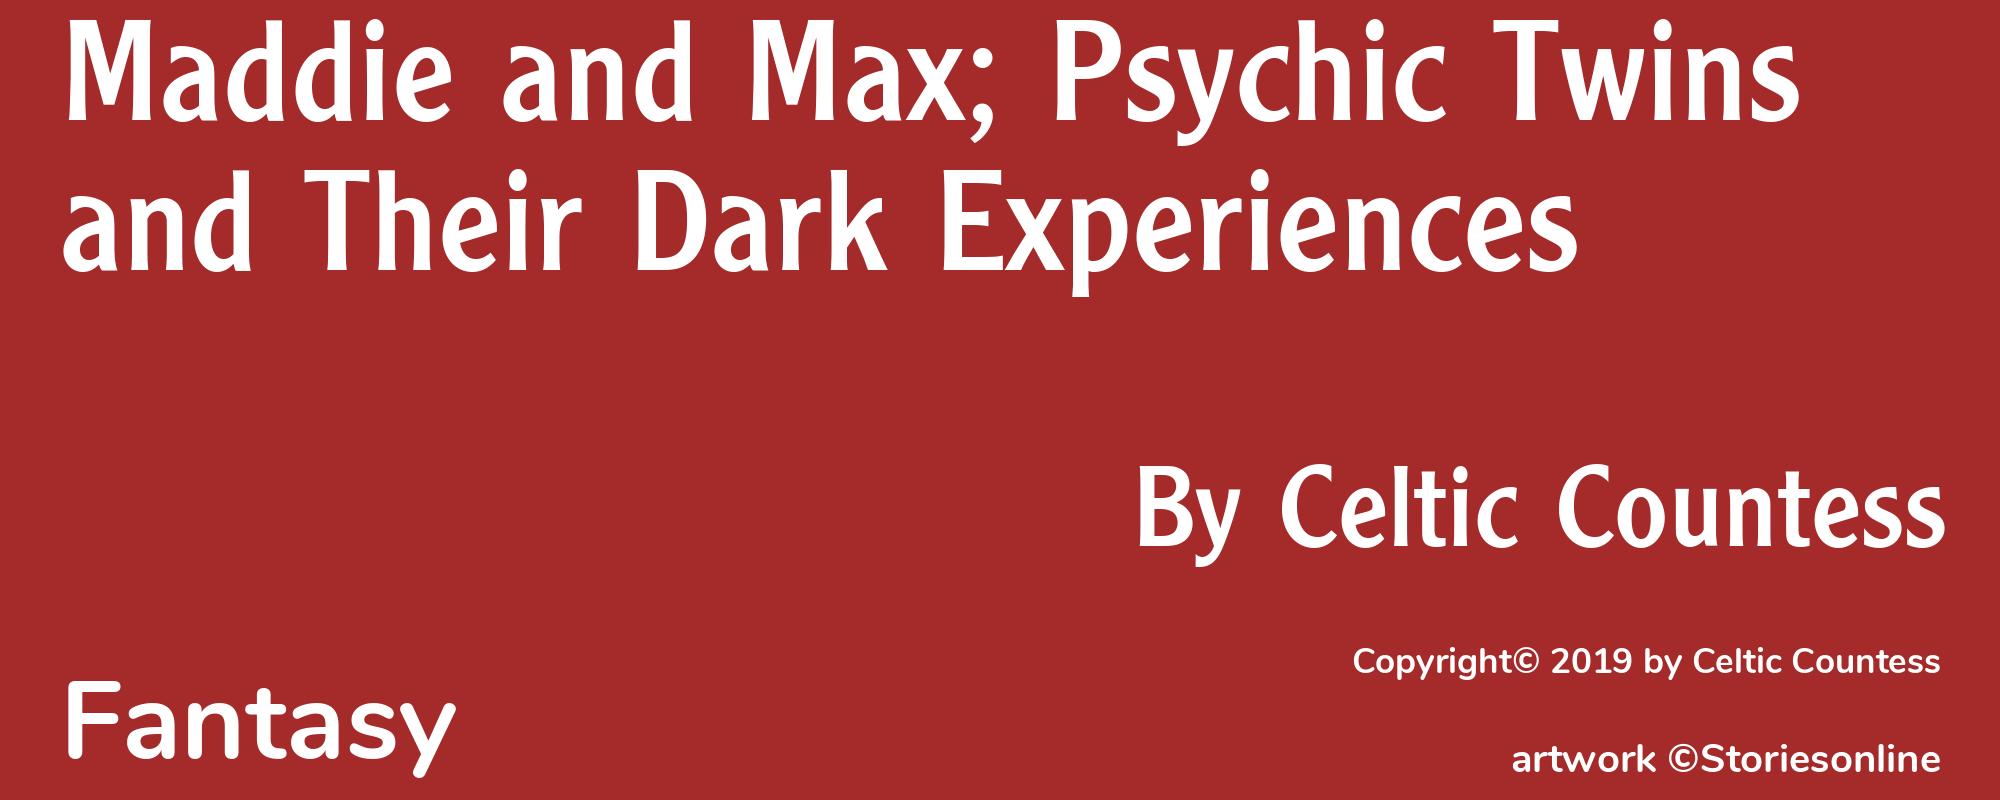 Maddie and Max; Psychic Twins and Their Dark Experiences - Cover